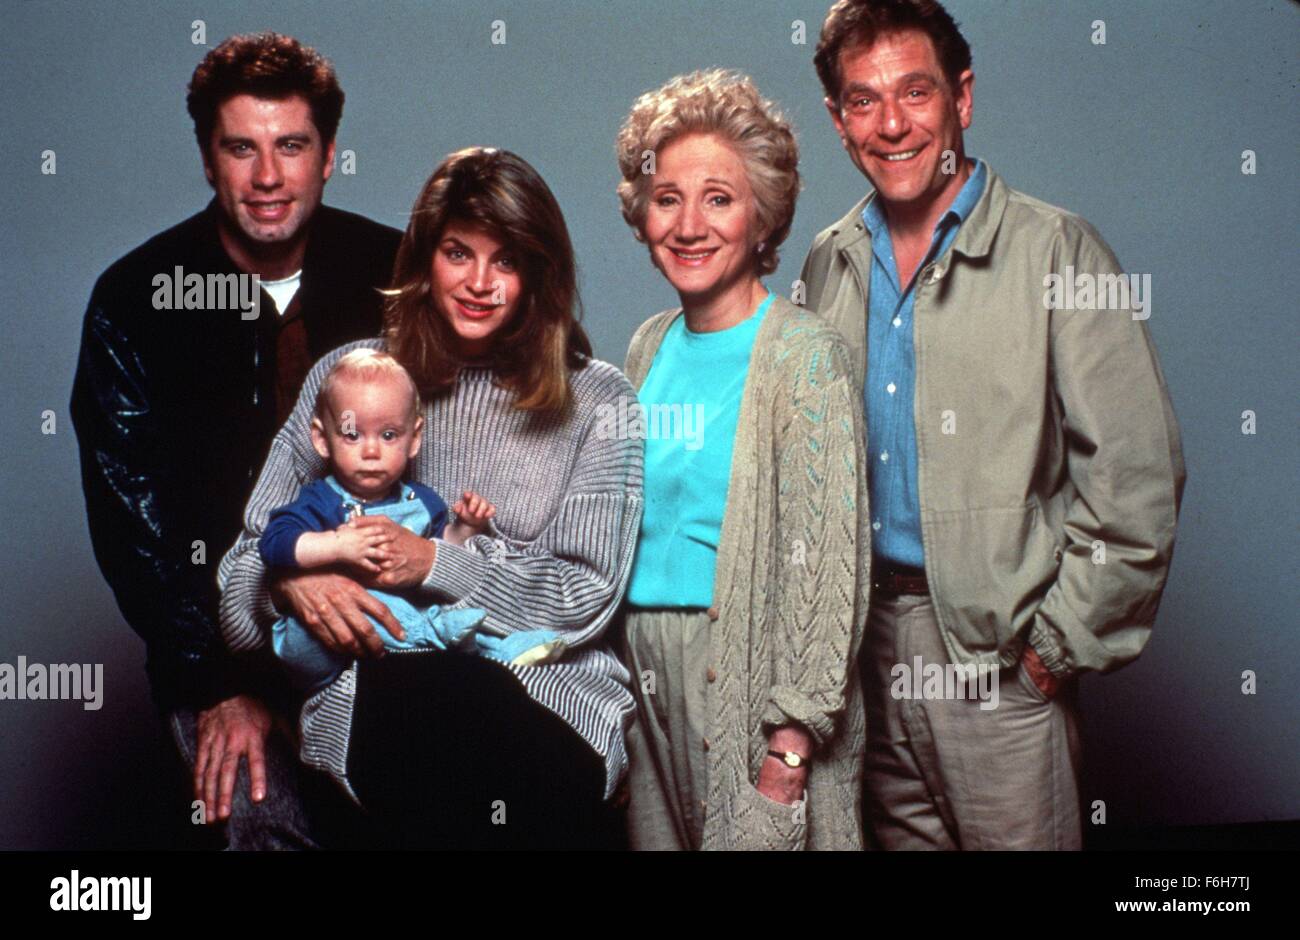 1989, Film Title: LOOK WHO'S TALKING, Director: AMY HECKERLING, Pictured: KIRSTIE ALLEY, BABY, OLYMPIA DUKAKIS, AMY HECKERLING, GEORGE SEGAL. (Credit Image: SNAP) Stock Photo